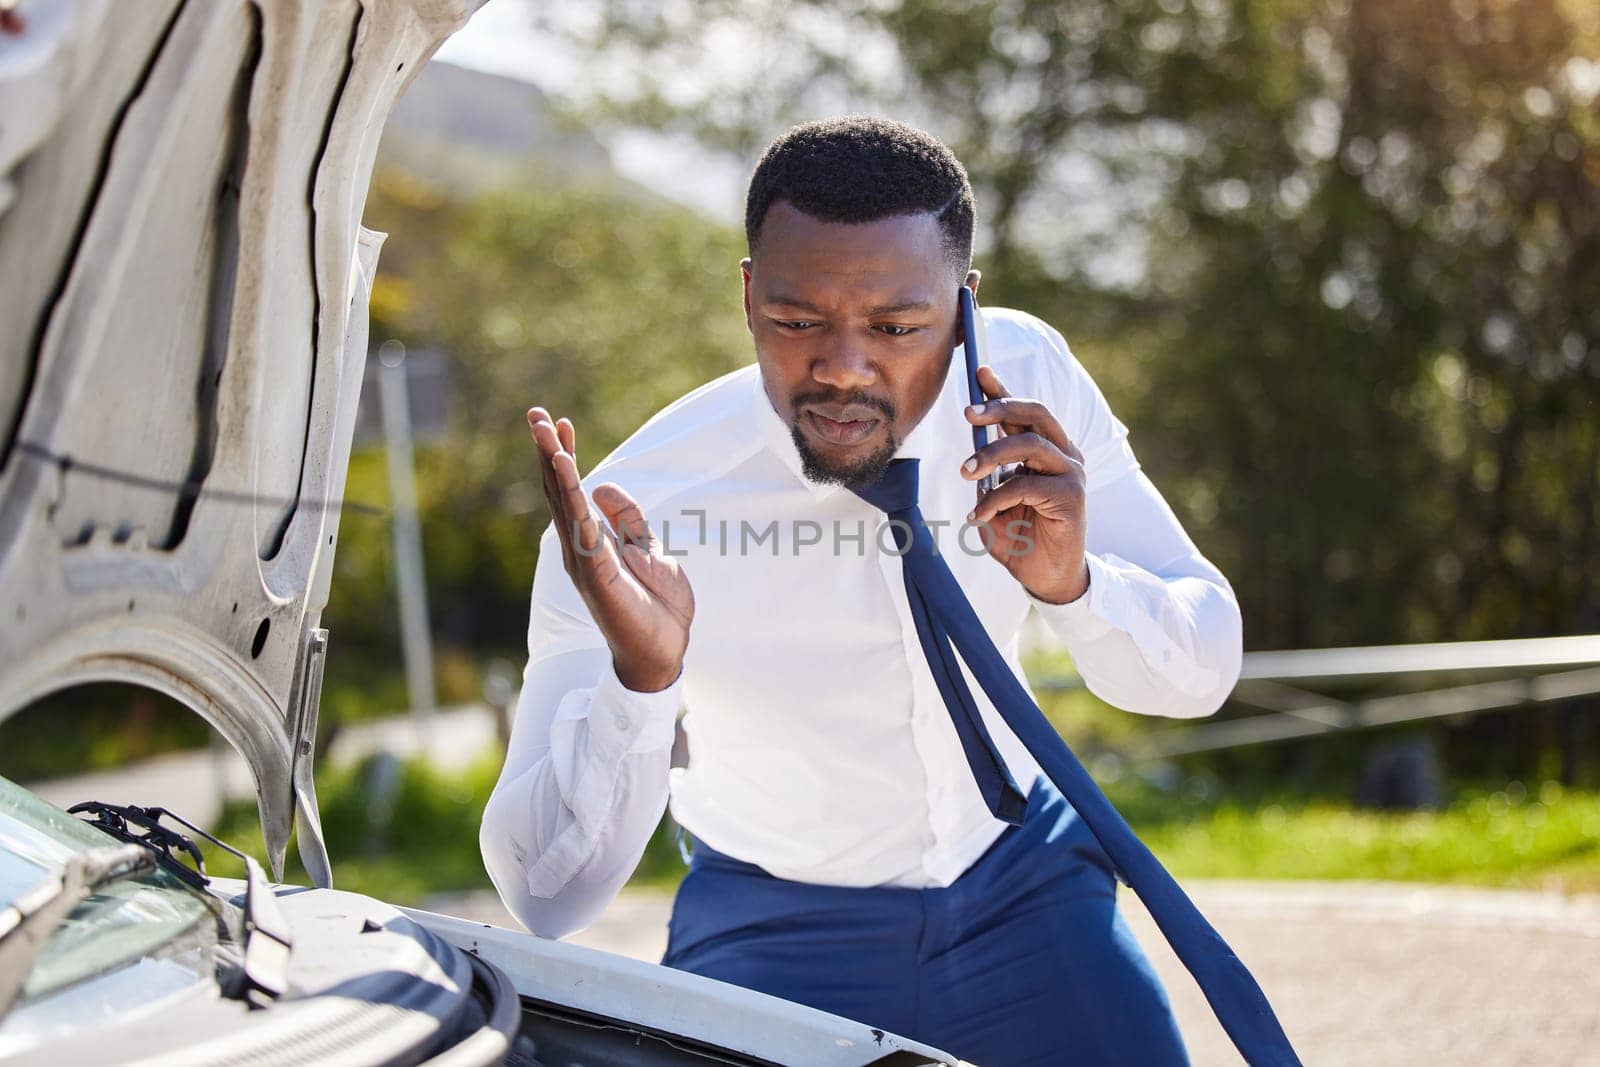 Phone call, car insurance and frustrated with black man in nature for roadside assistance, safety and emergency. Stress, angry and transportation with driver and vehicle breakdown for motor and help.